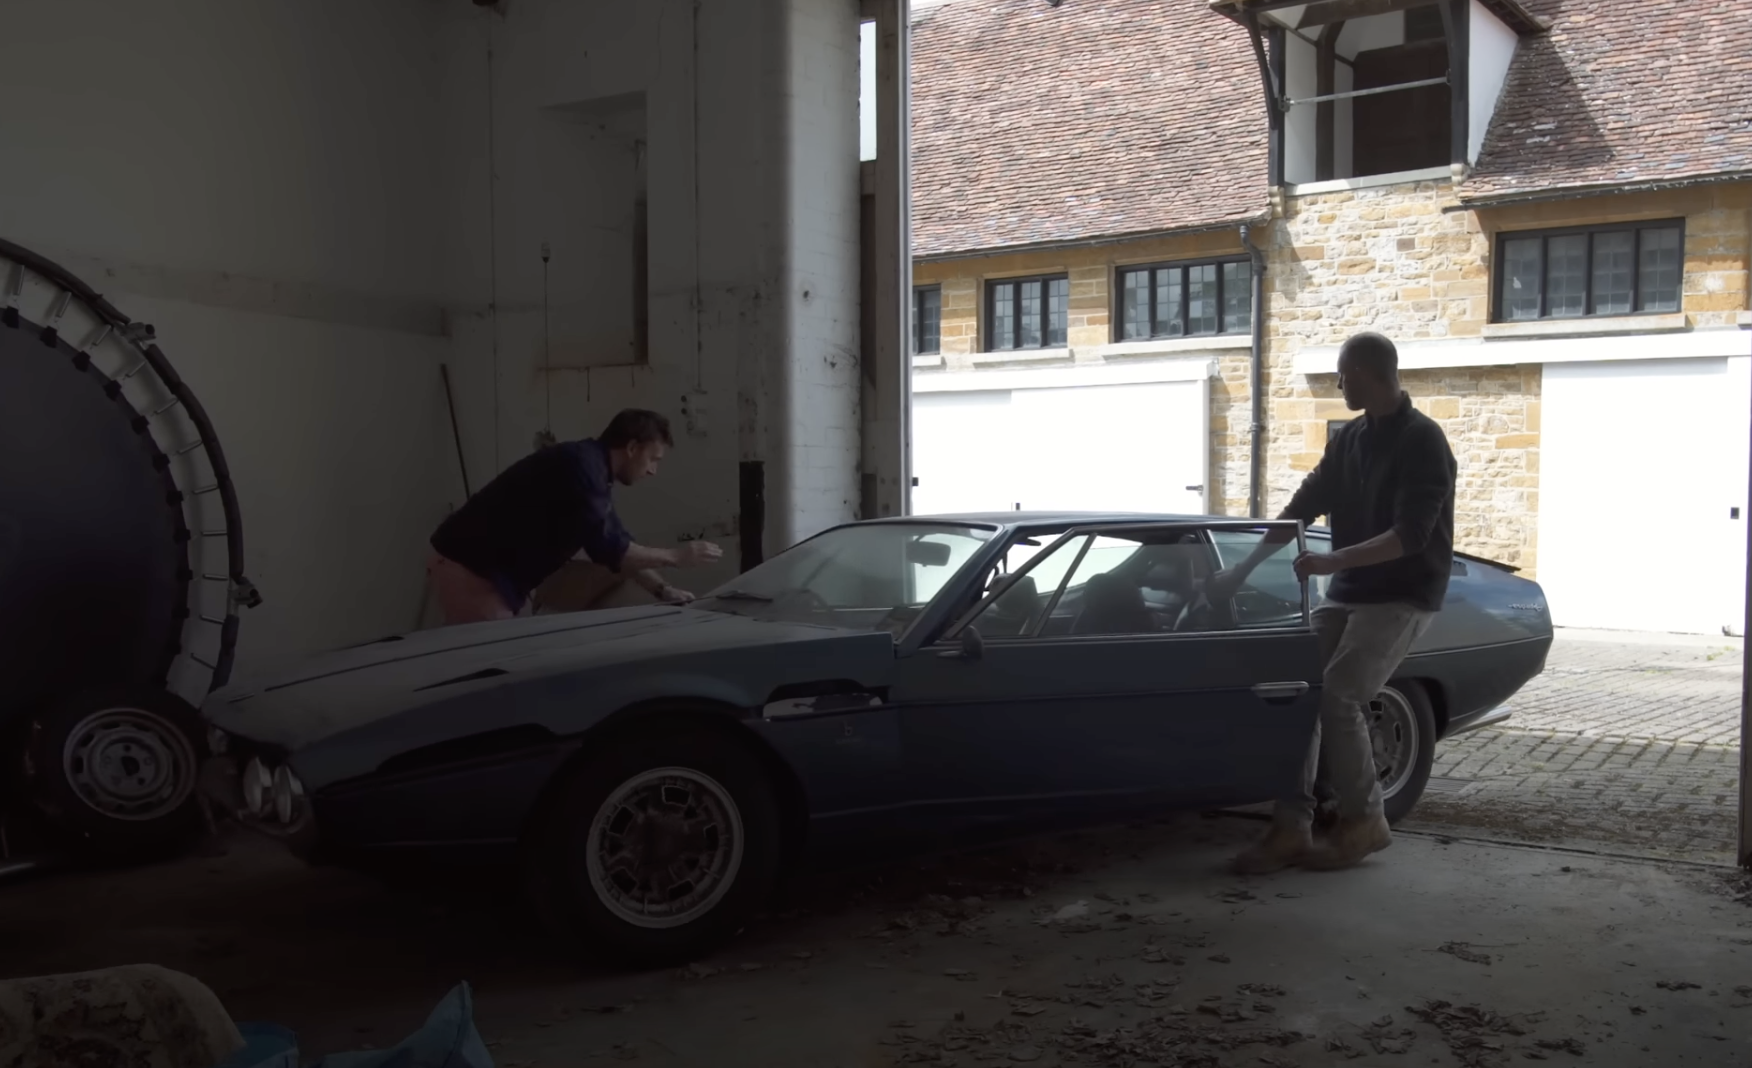 Video: V12 Powered Lamborghini Espada Barn Find Fires Up After 15 Years